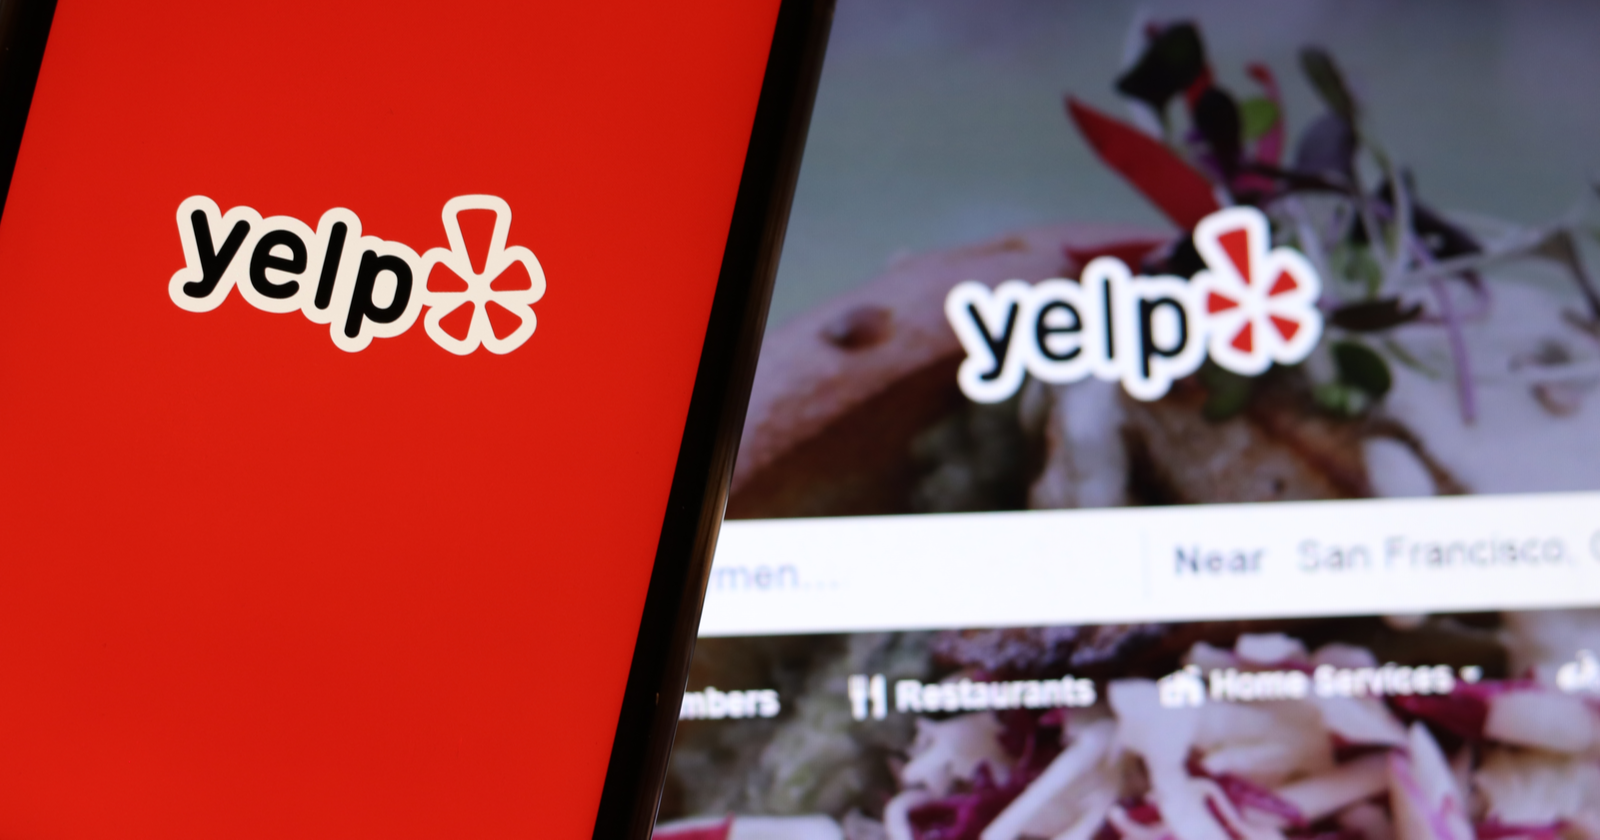 15 Facts You Didn’t Know About Yelp